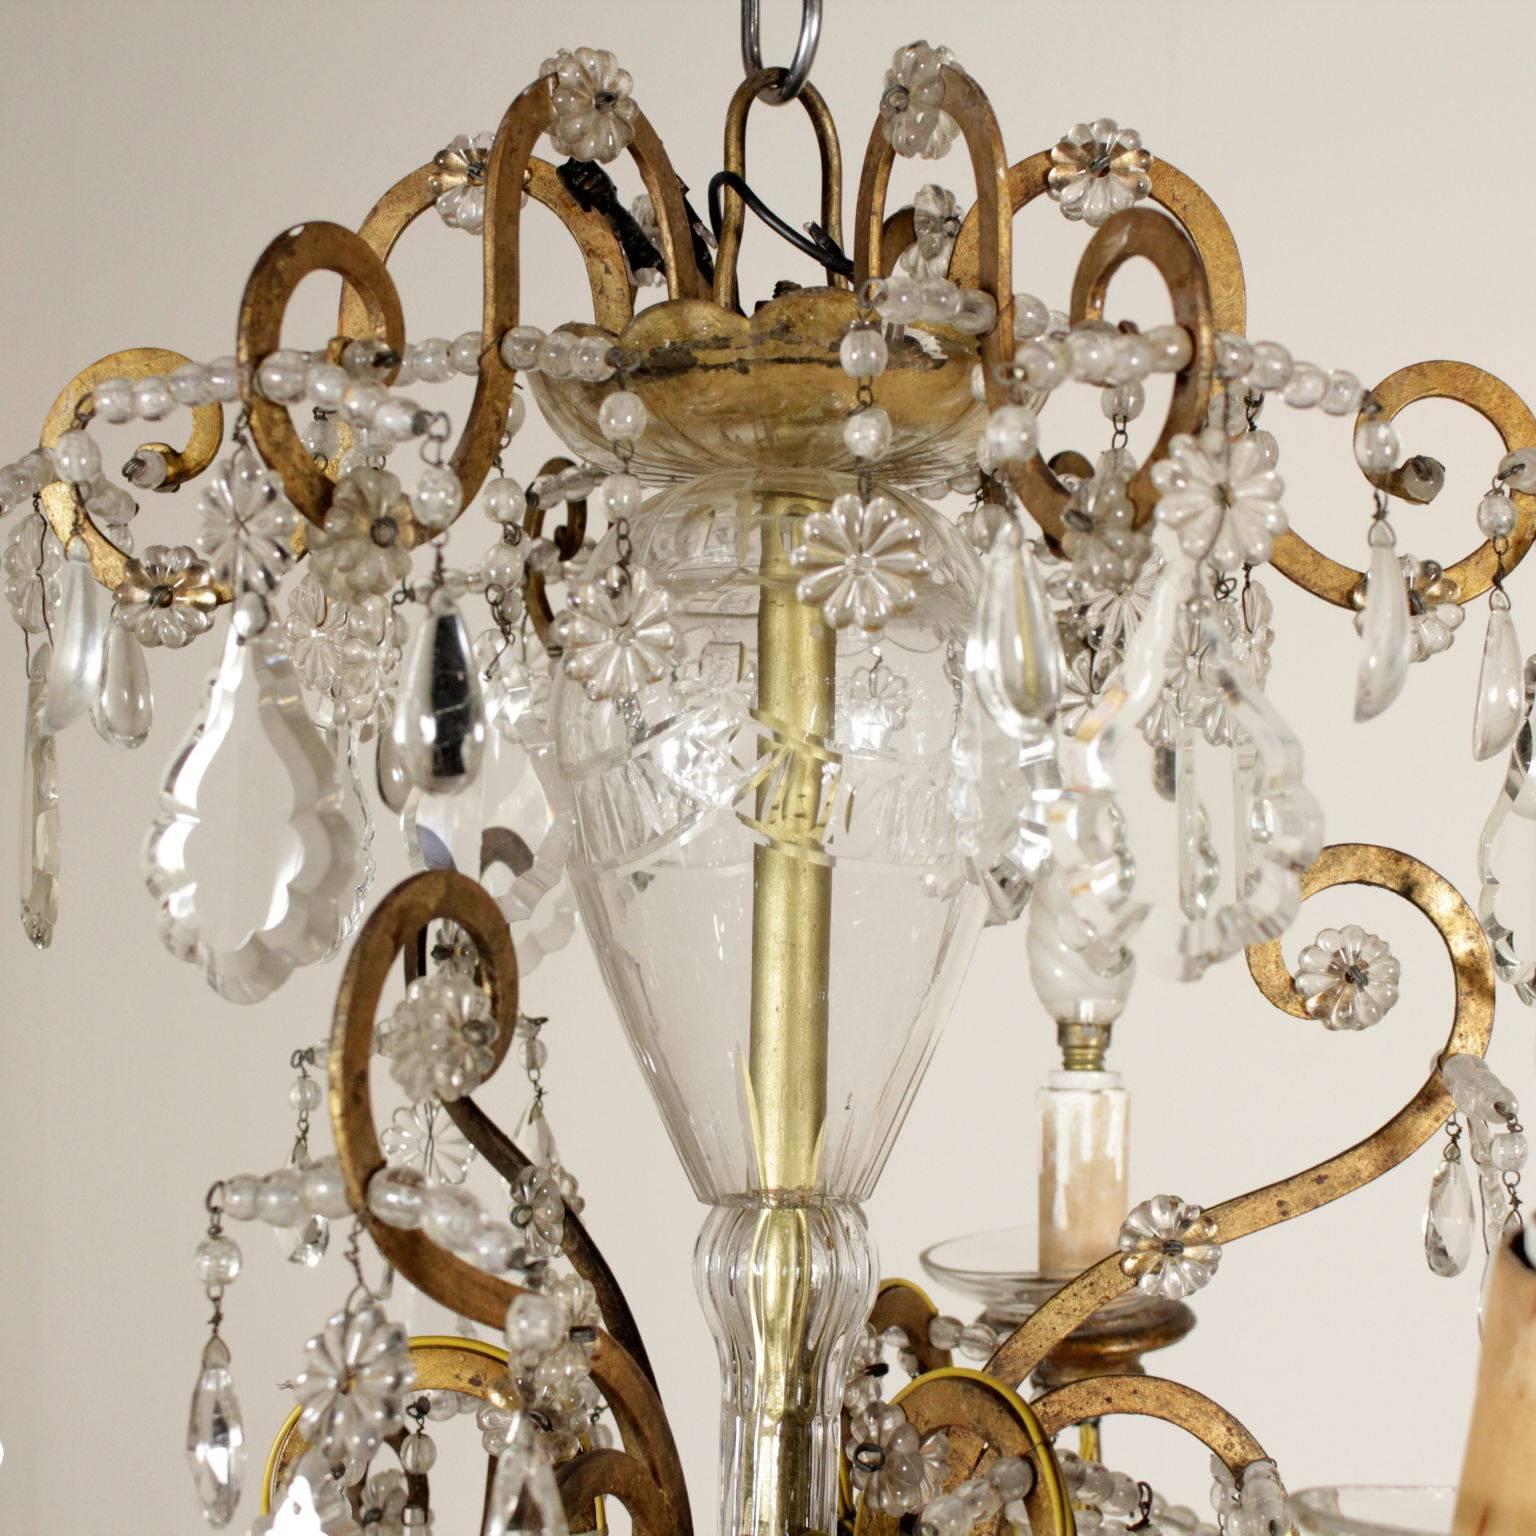 An antique ceiling lamp with gilded iron volutes and nine-light points. Embellished with glass and crystal pendants. 18th century.